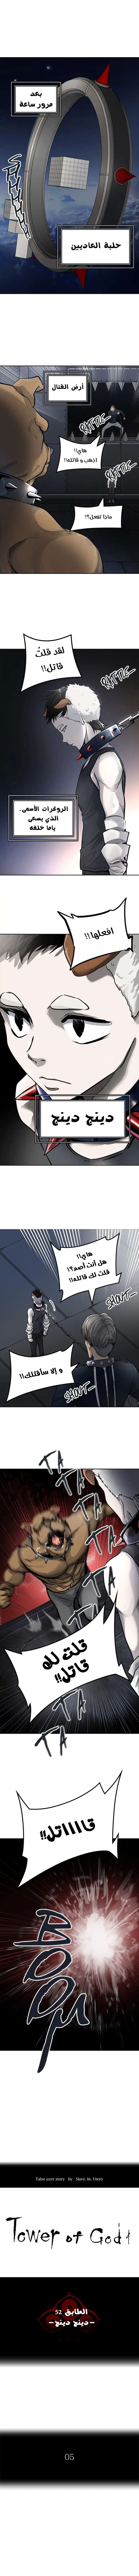 Tower of God S3: Chapter 6 - Page 1